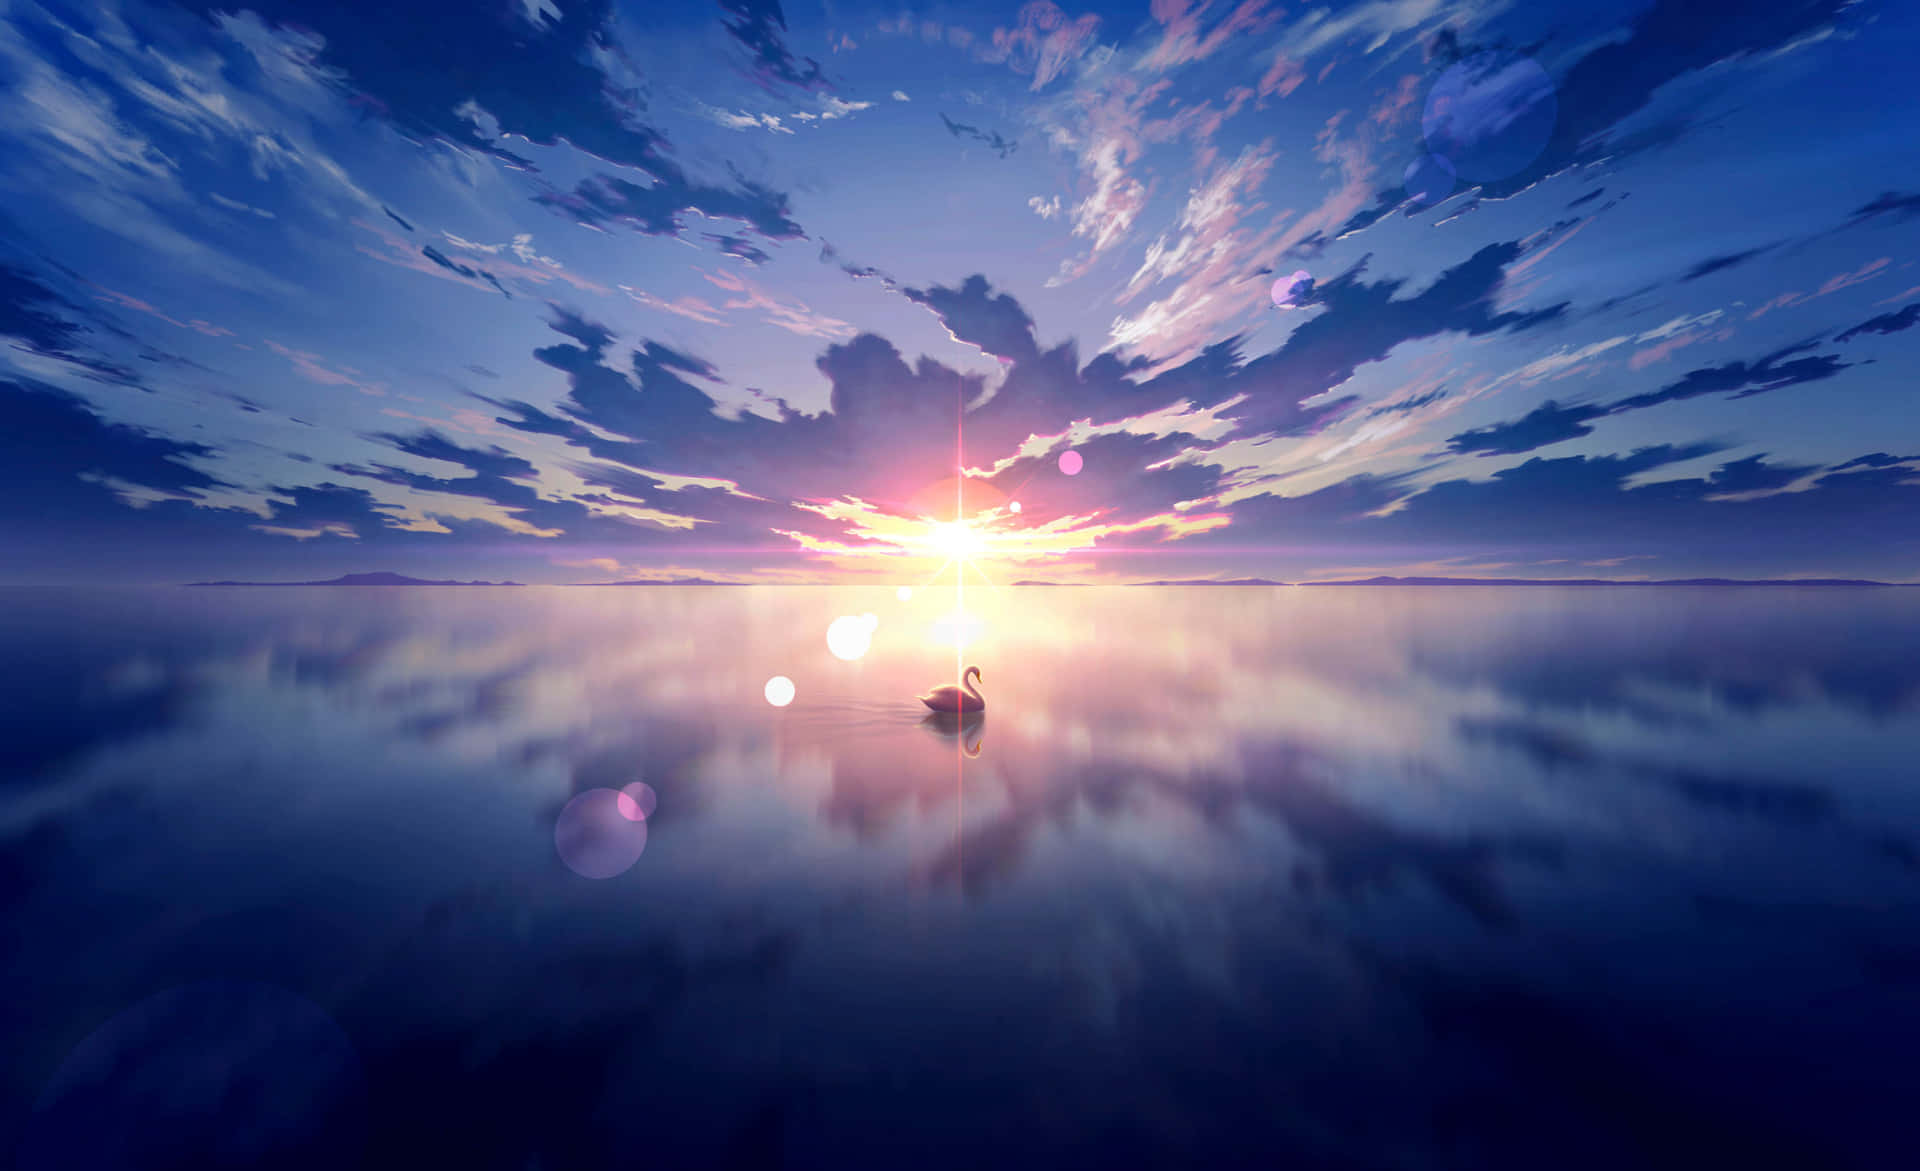 "A serene anime landscape full of beauty and charm" Wallpaper